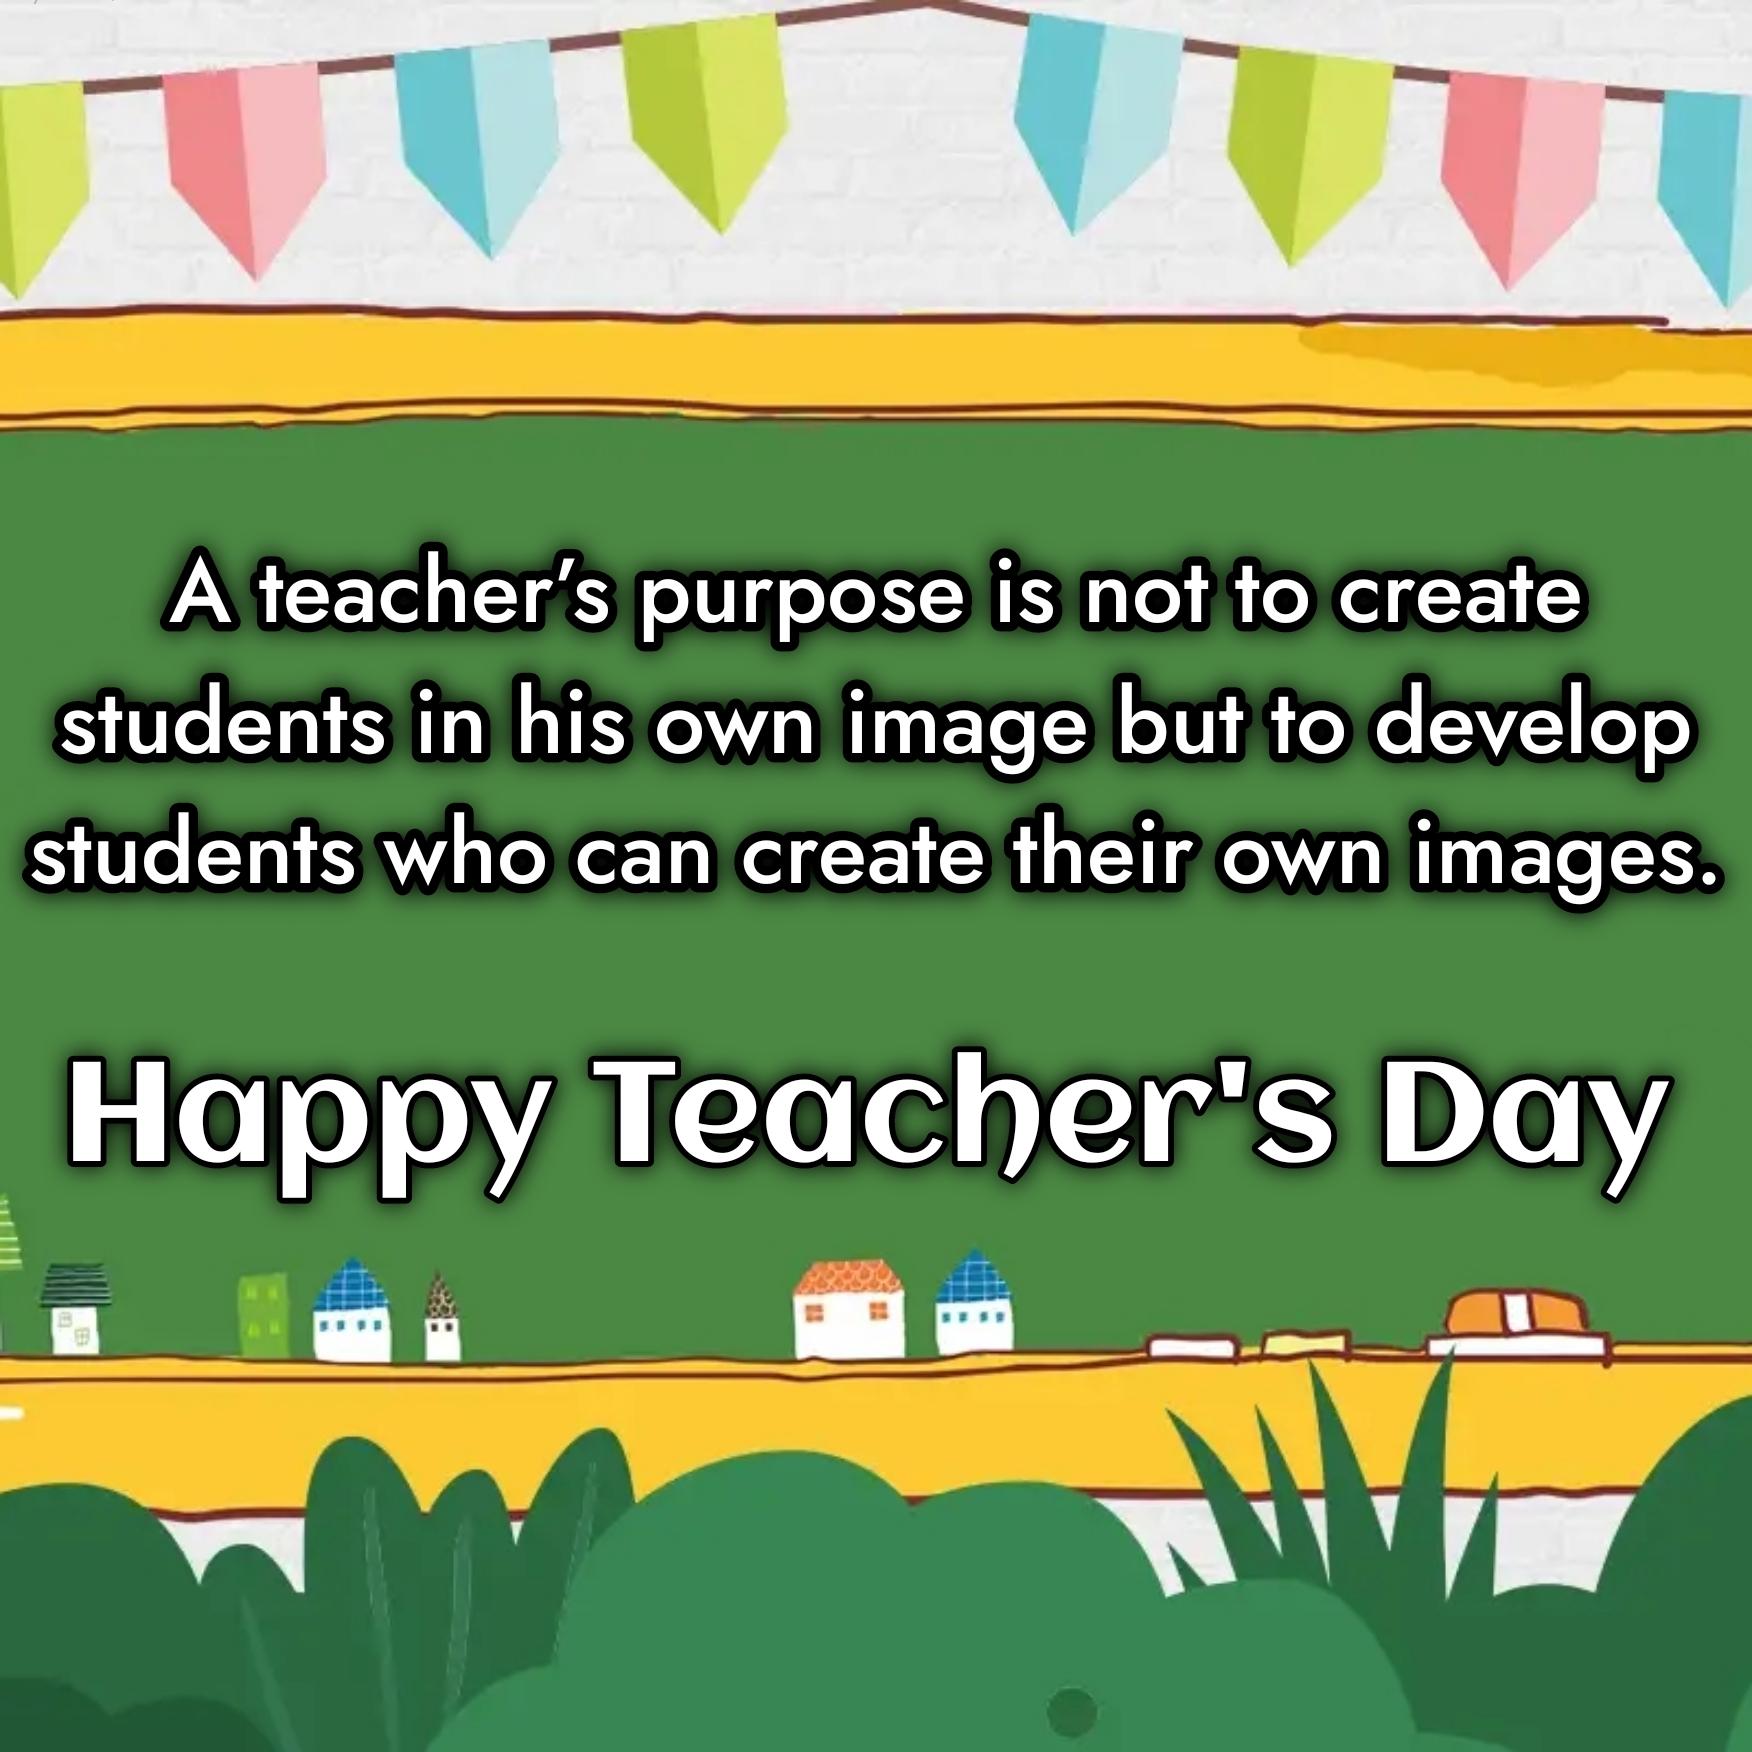 A teacher’s purpose is not to create students in his own image